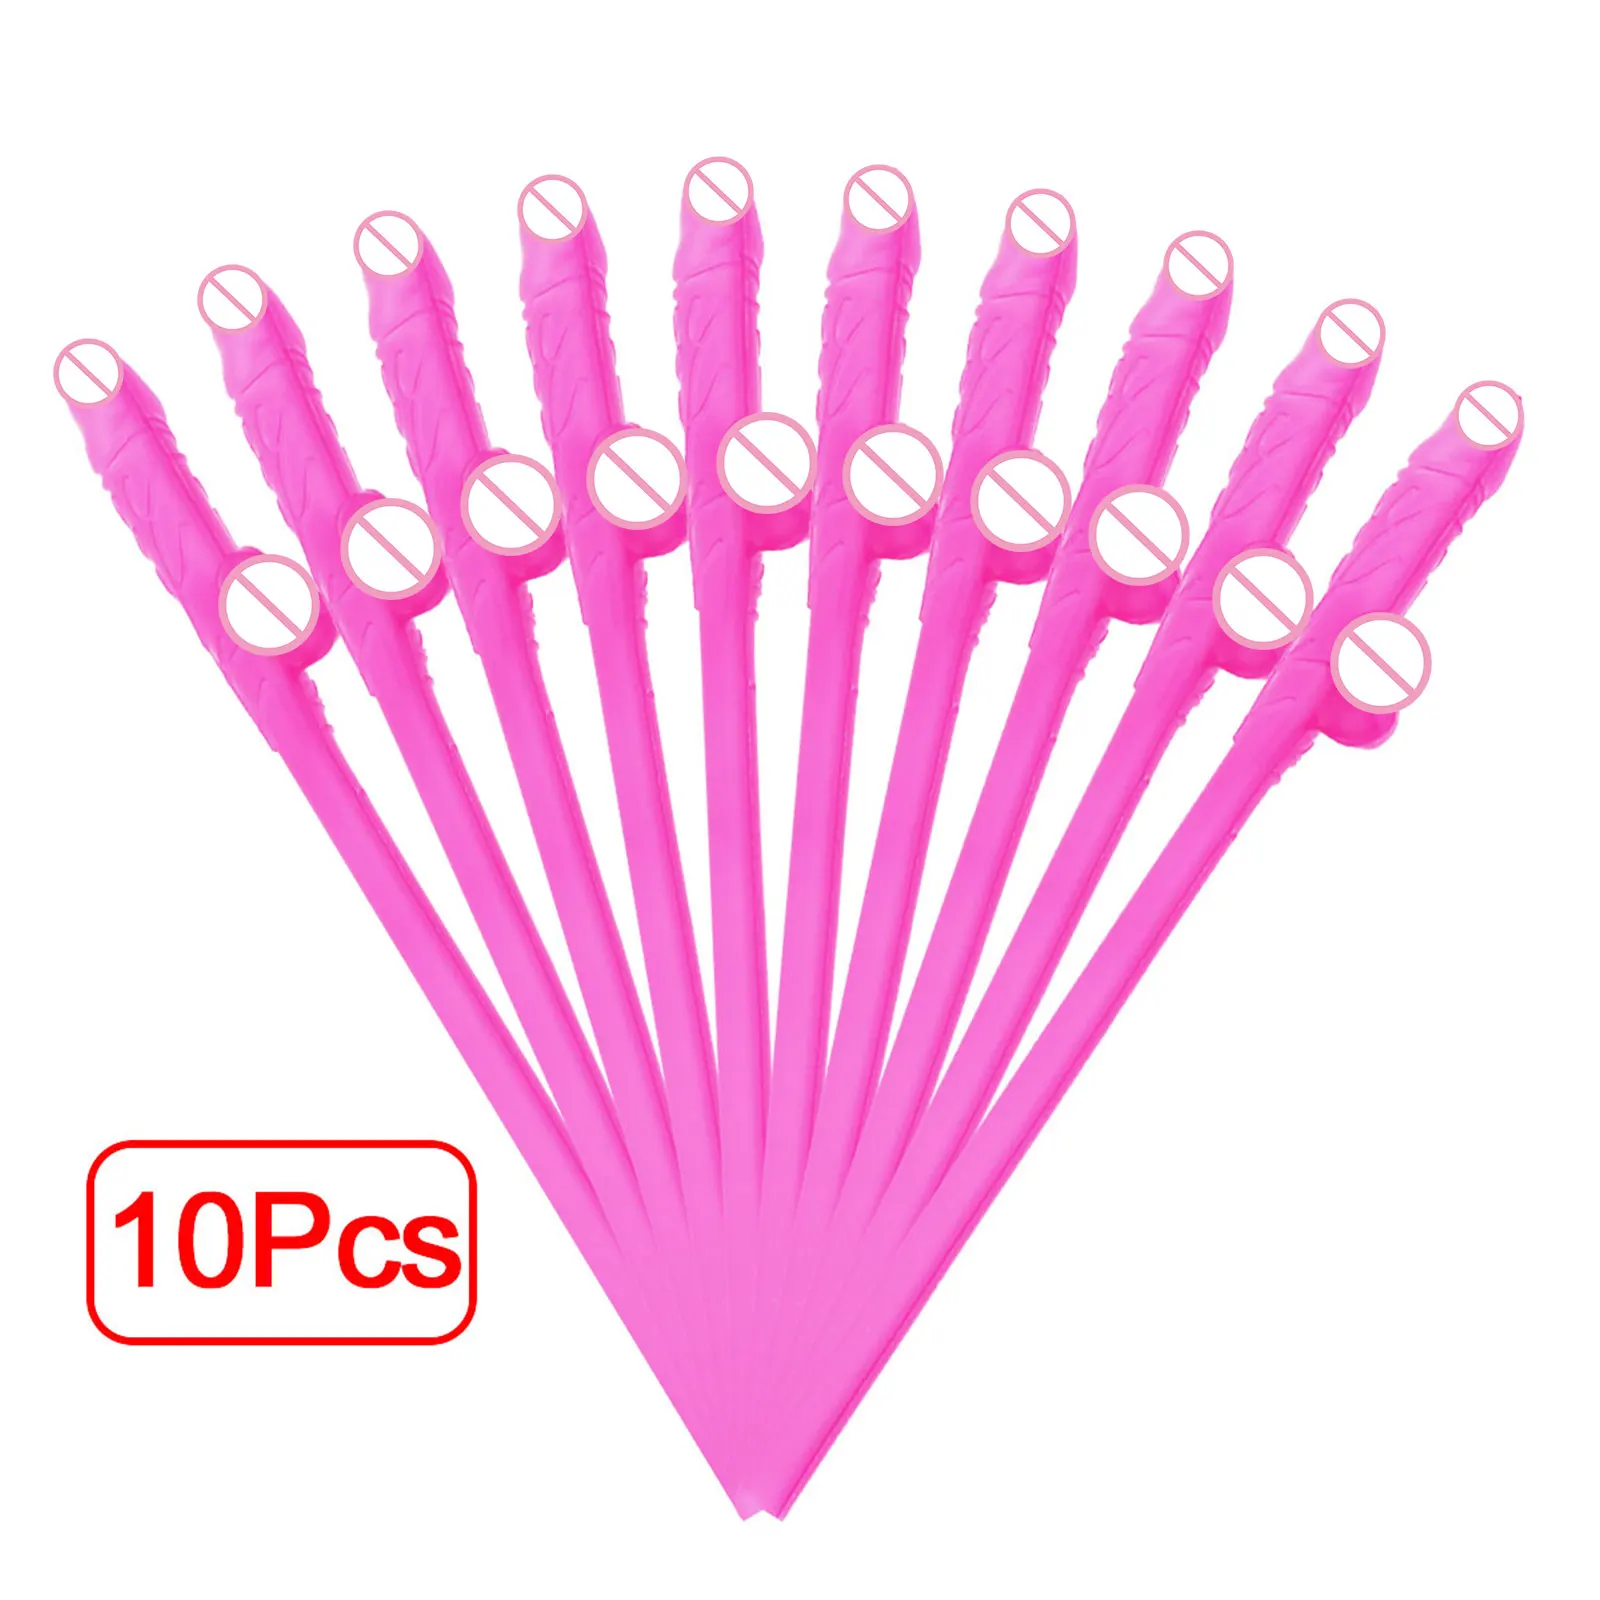 20x Willy Drinking Straws Novelty Hens Night Party Dicky Sipping Straw 